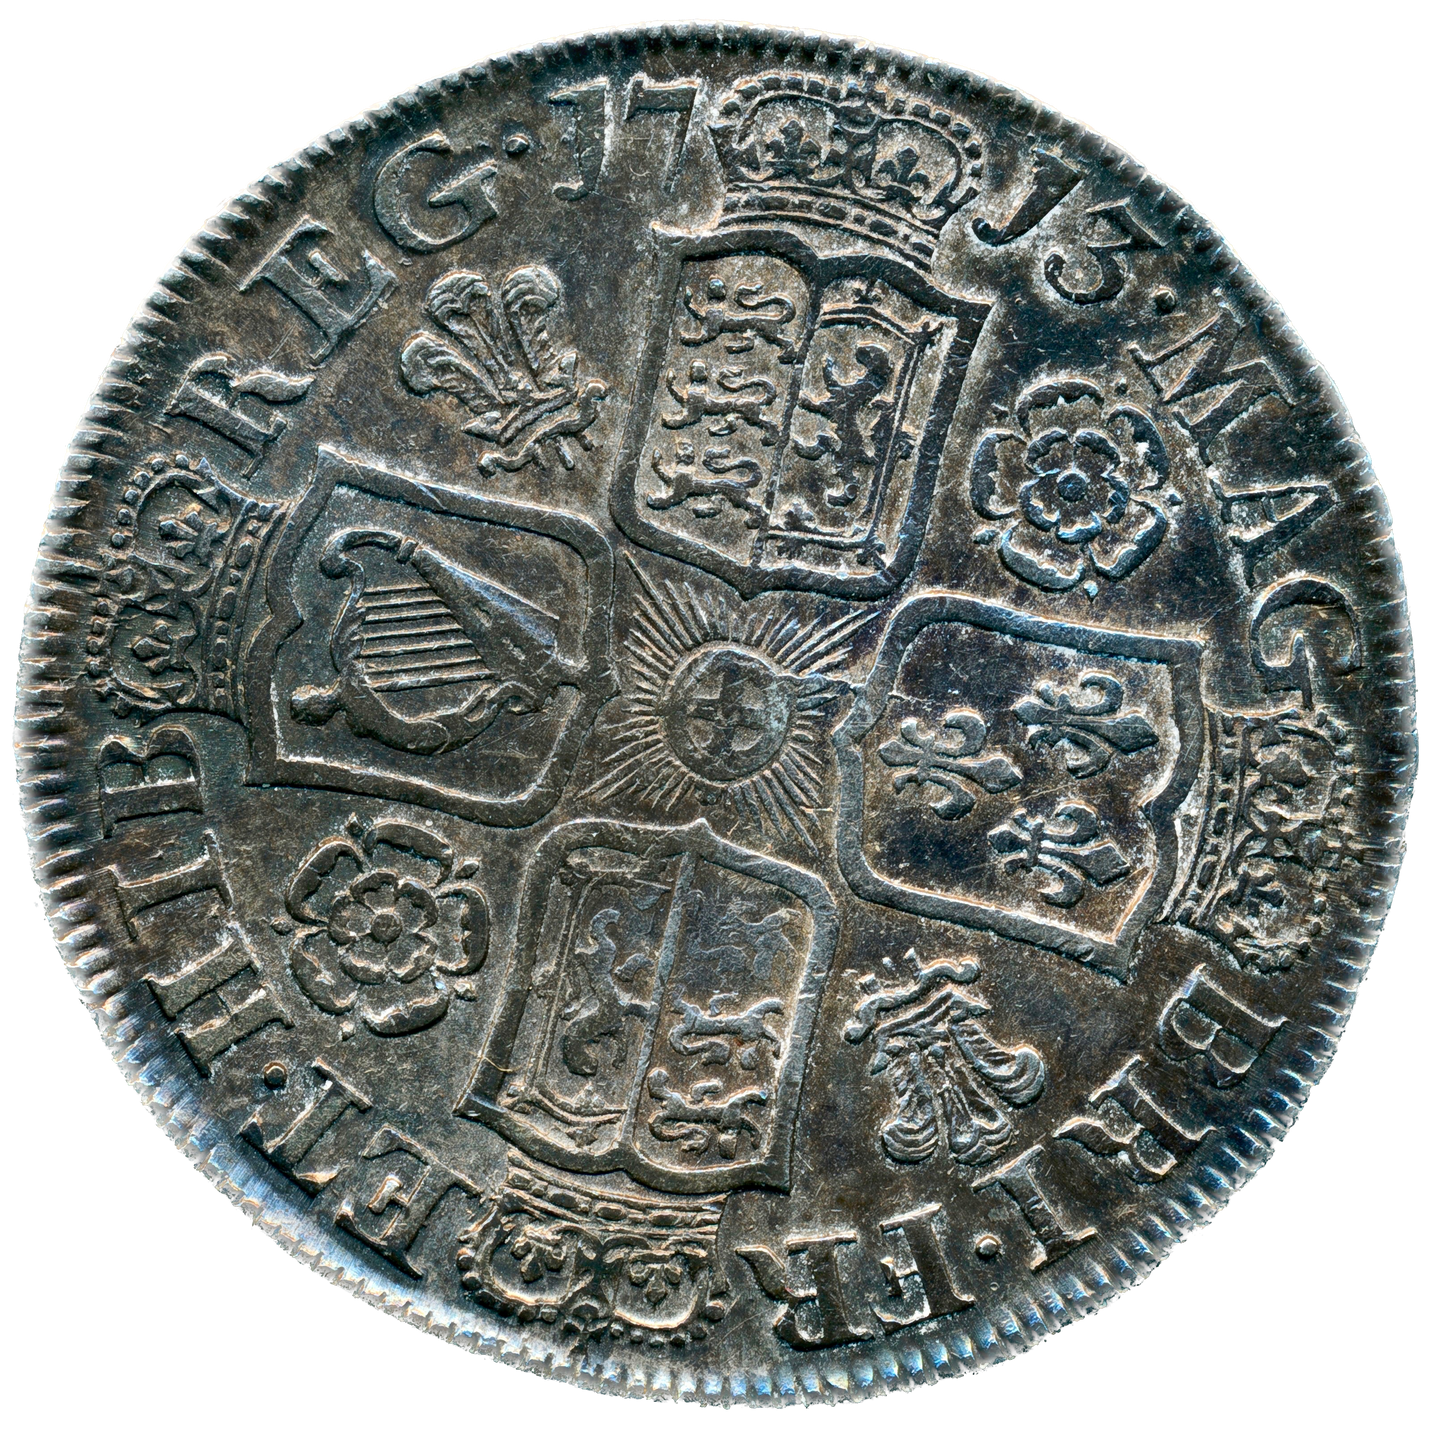 1713 Halfcrown Second bust Roses and plumes Edge DVODECIMO S3607 ESC 1375 Scarce VF/GVF